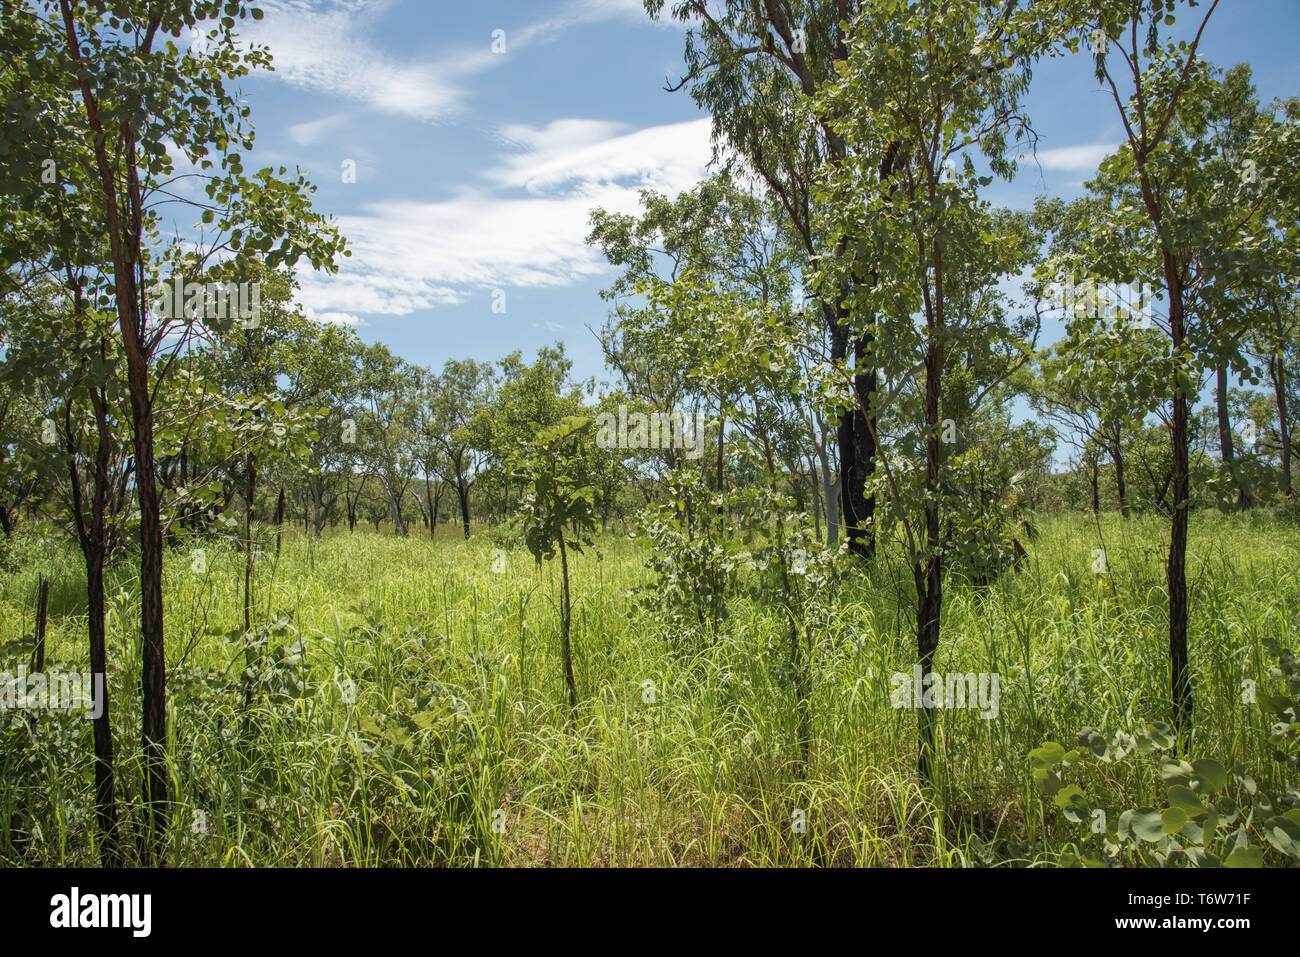 Stunning green, lush bushland growing at Litchfield National Park on a sunny day in the Northern Territory of Australia Stock Photo